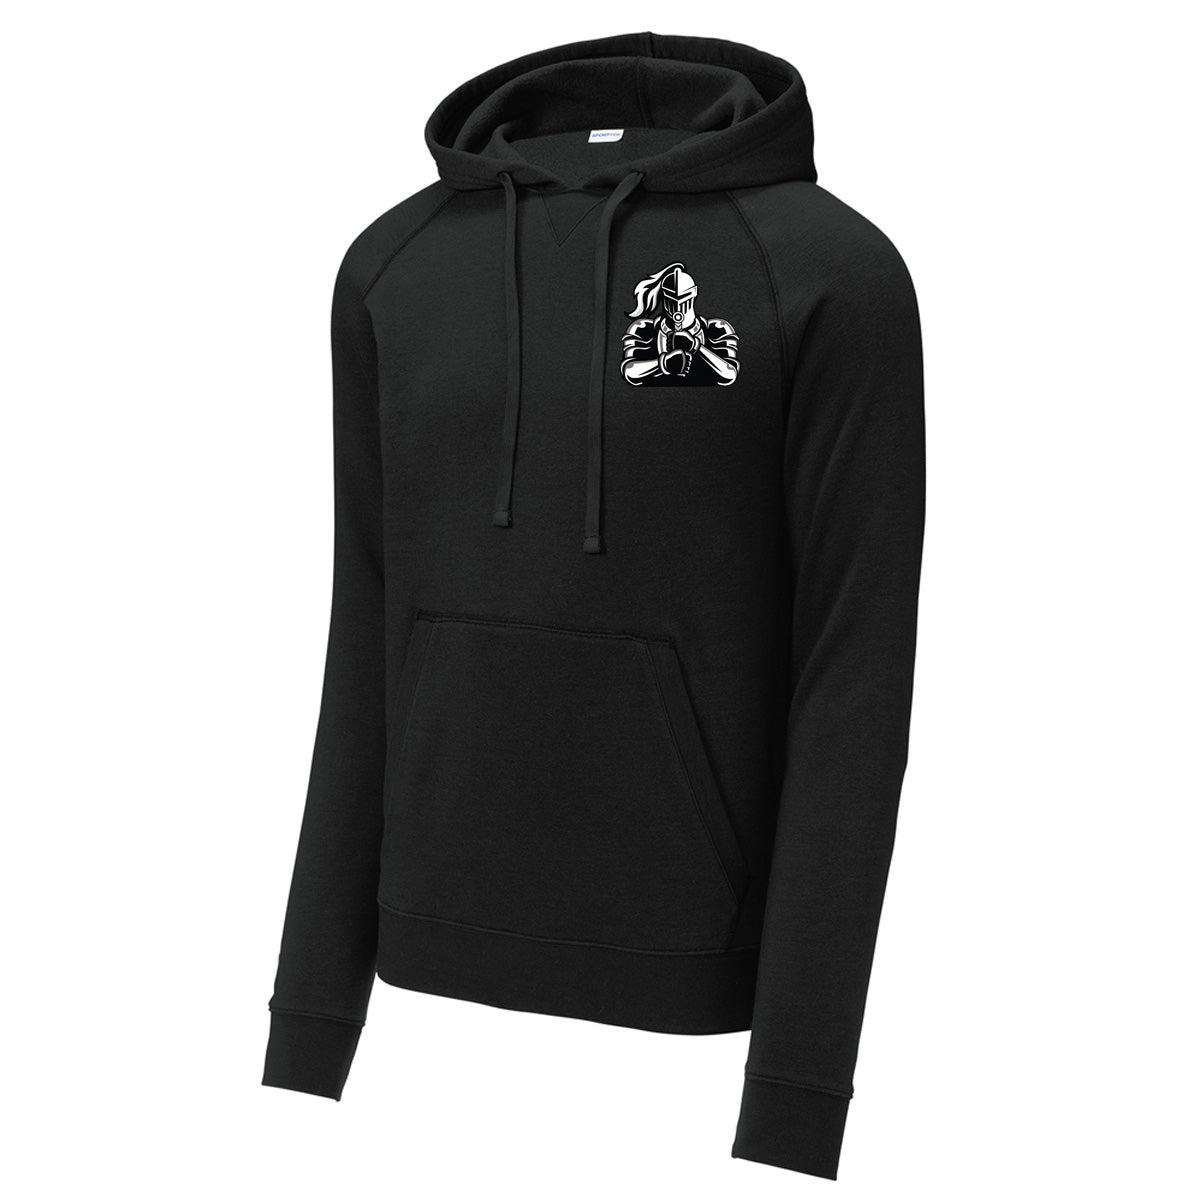 Windsor - Black Hoodie with Knight (left chest) - Sport-Tek Drive Fleece (STF200) - Southern Grace Creations